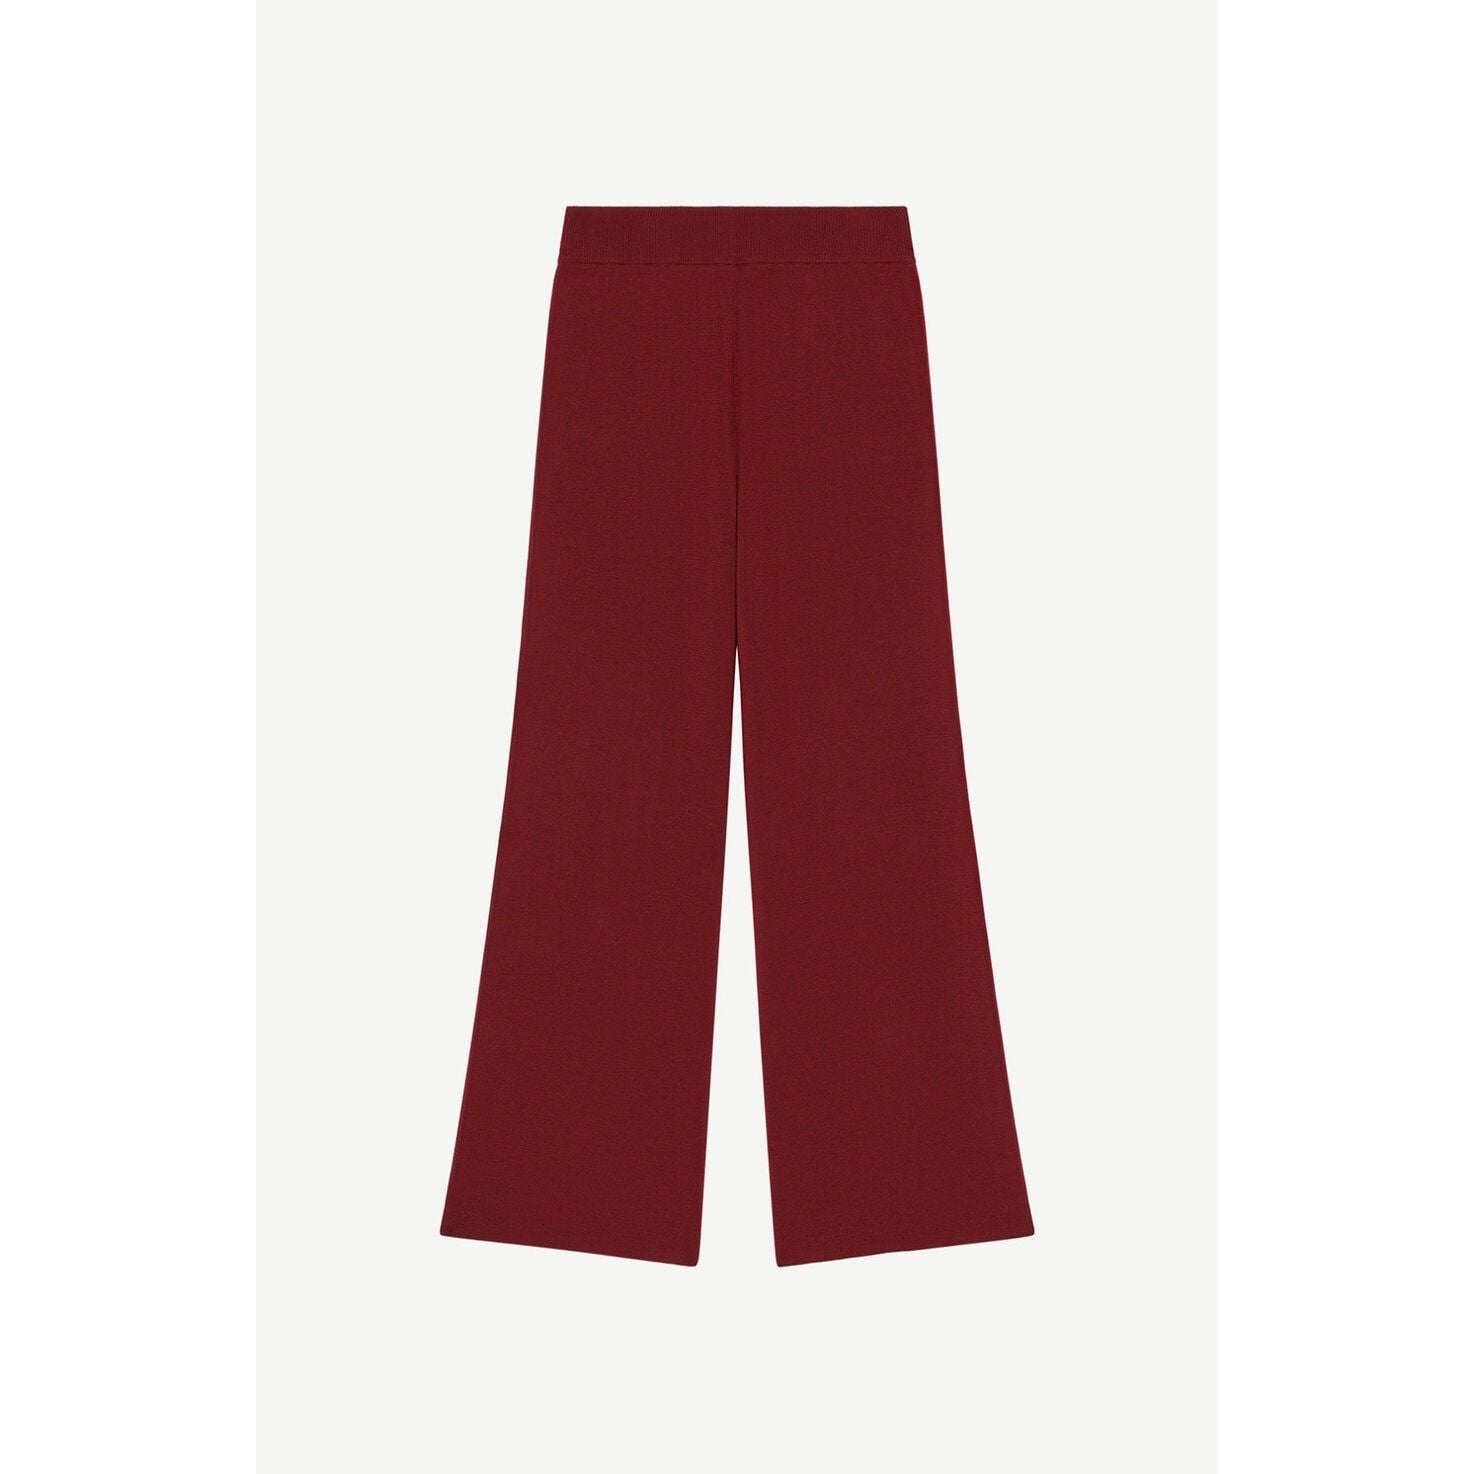 KENZO 'TIGER TAIL K' FLARED TROUSERS - Yooto